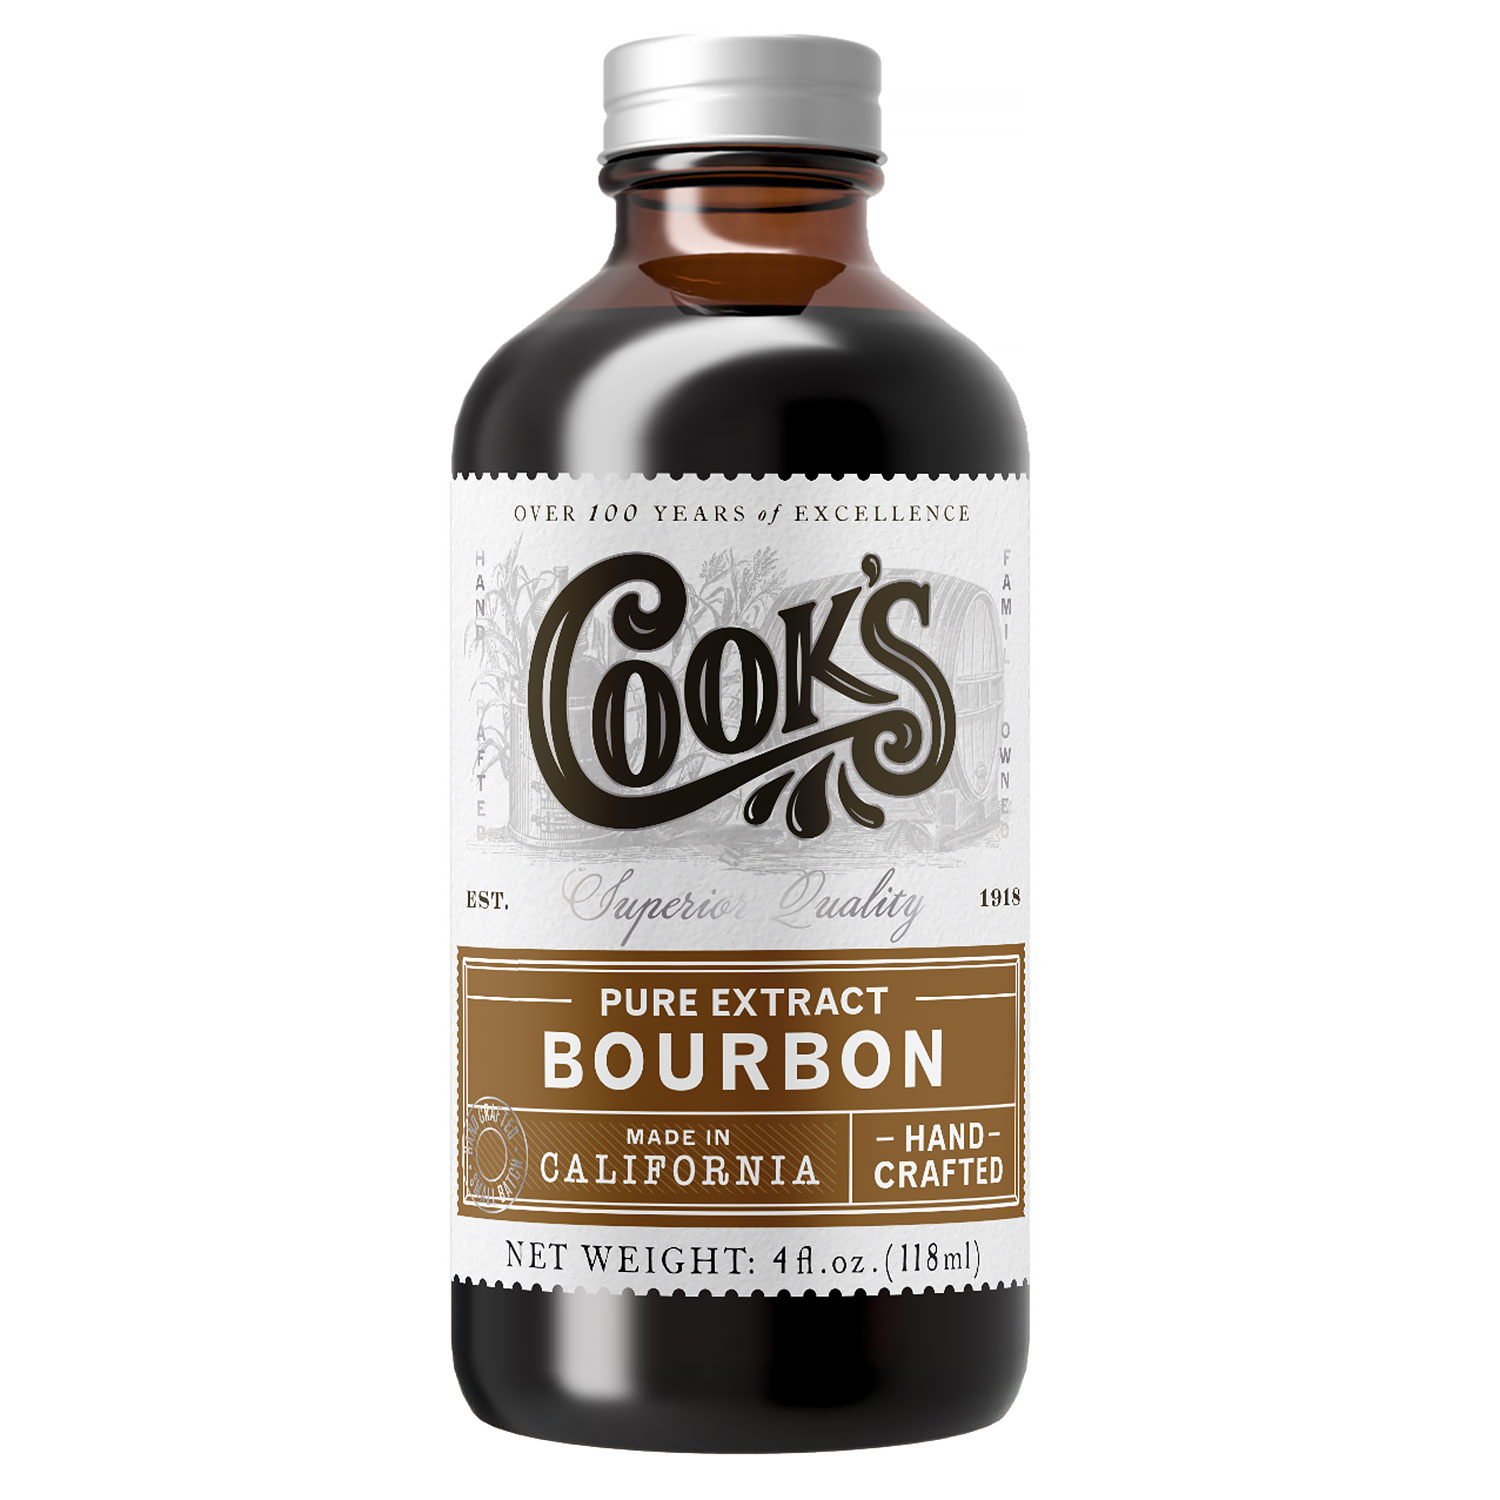 Cook's Pure Bourbon Extract